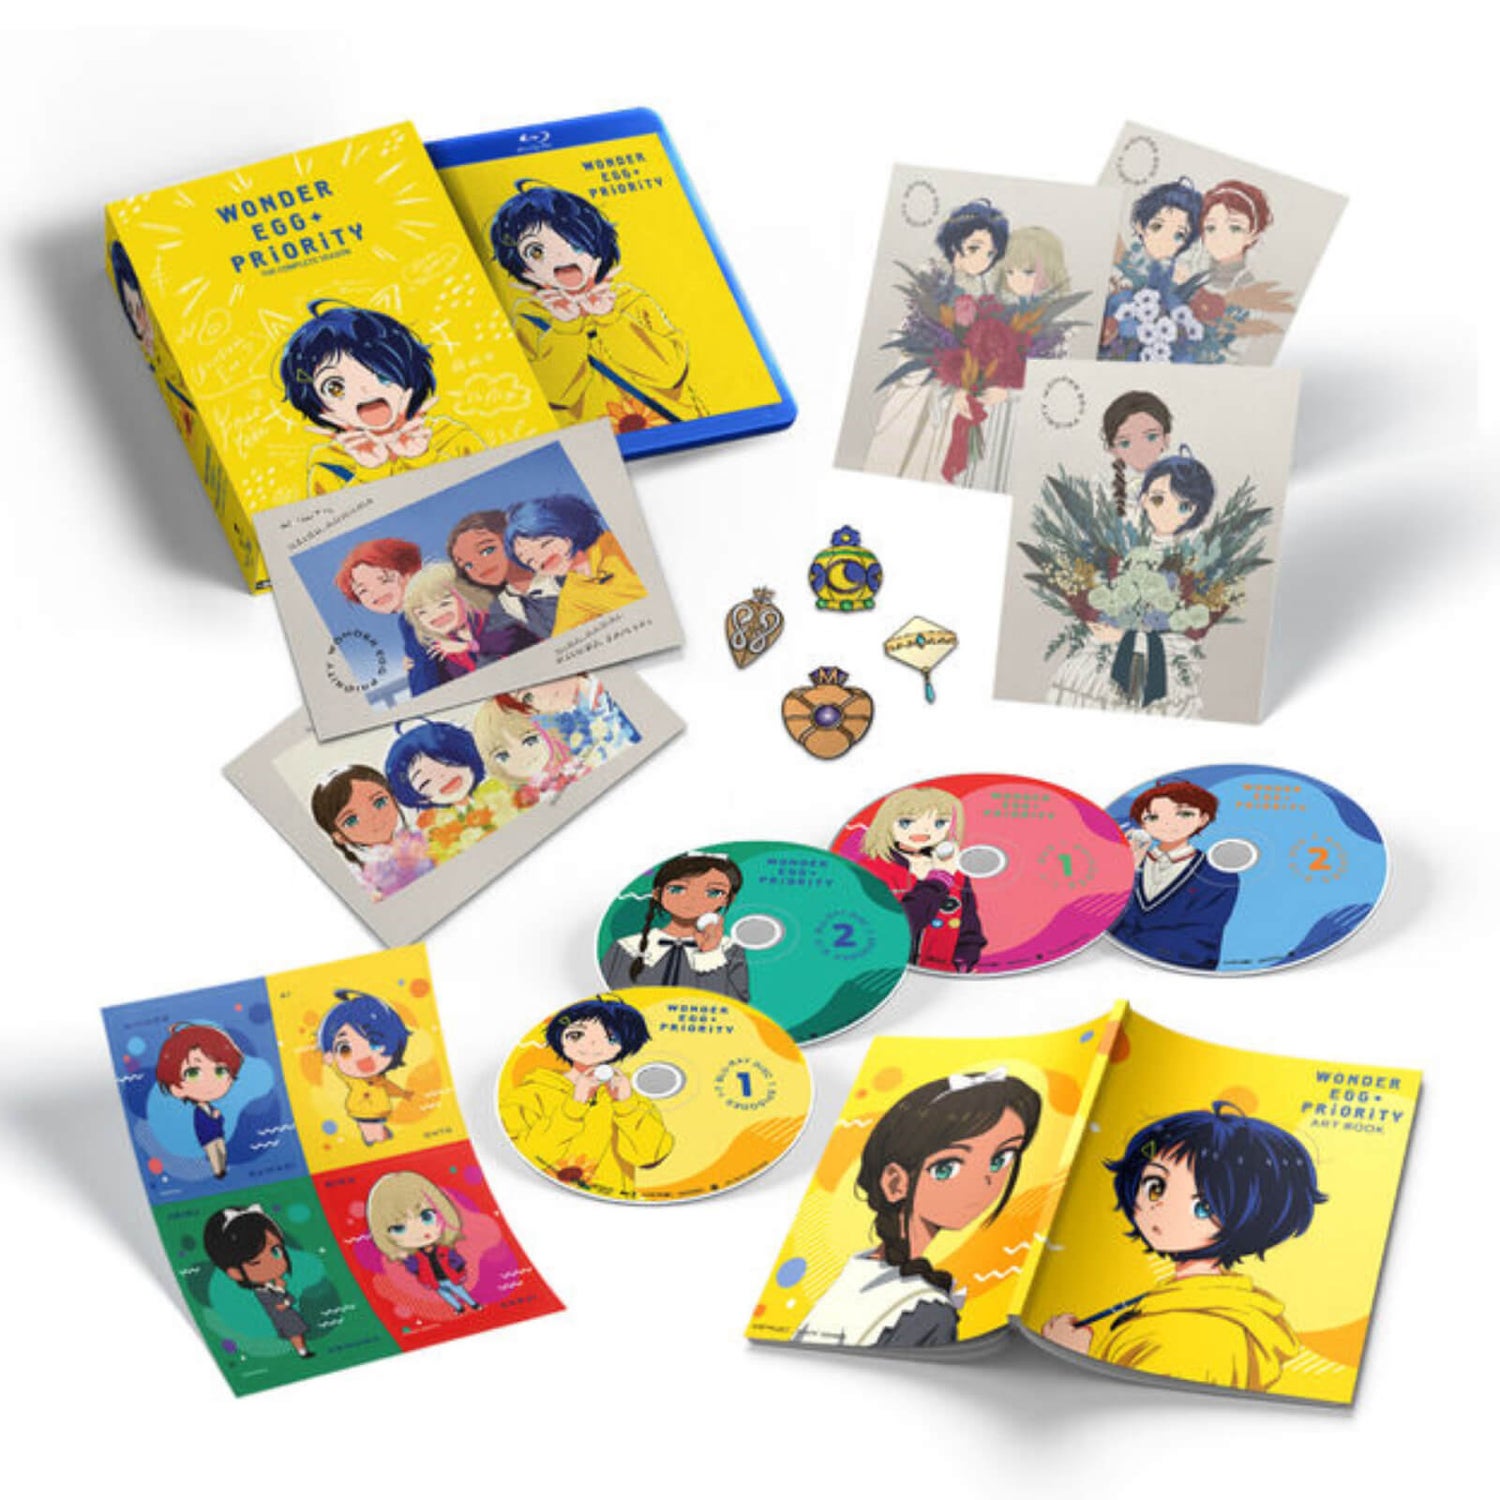 Wonder Egg Priority: The Complete Season - Limited Edition (Includes DVD) (US Import)